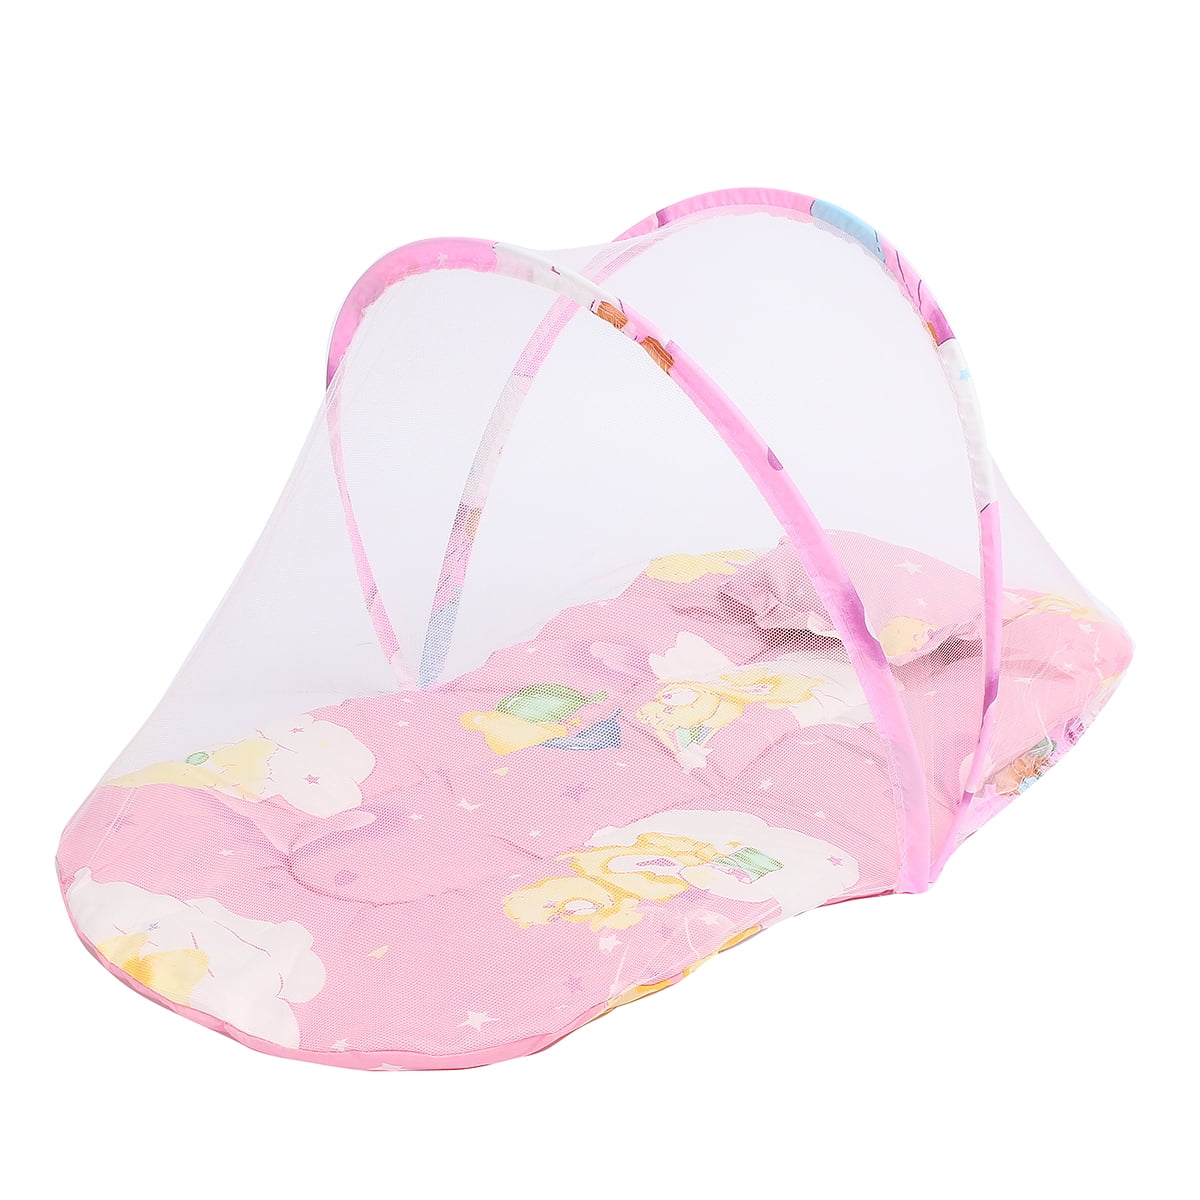 baby mosquito tent bed